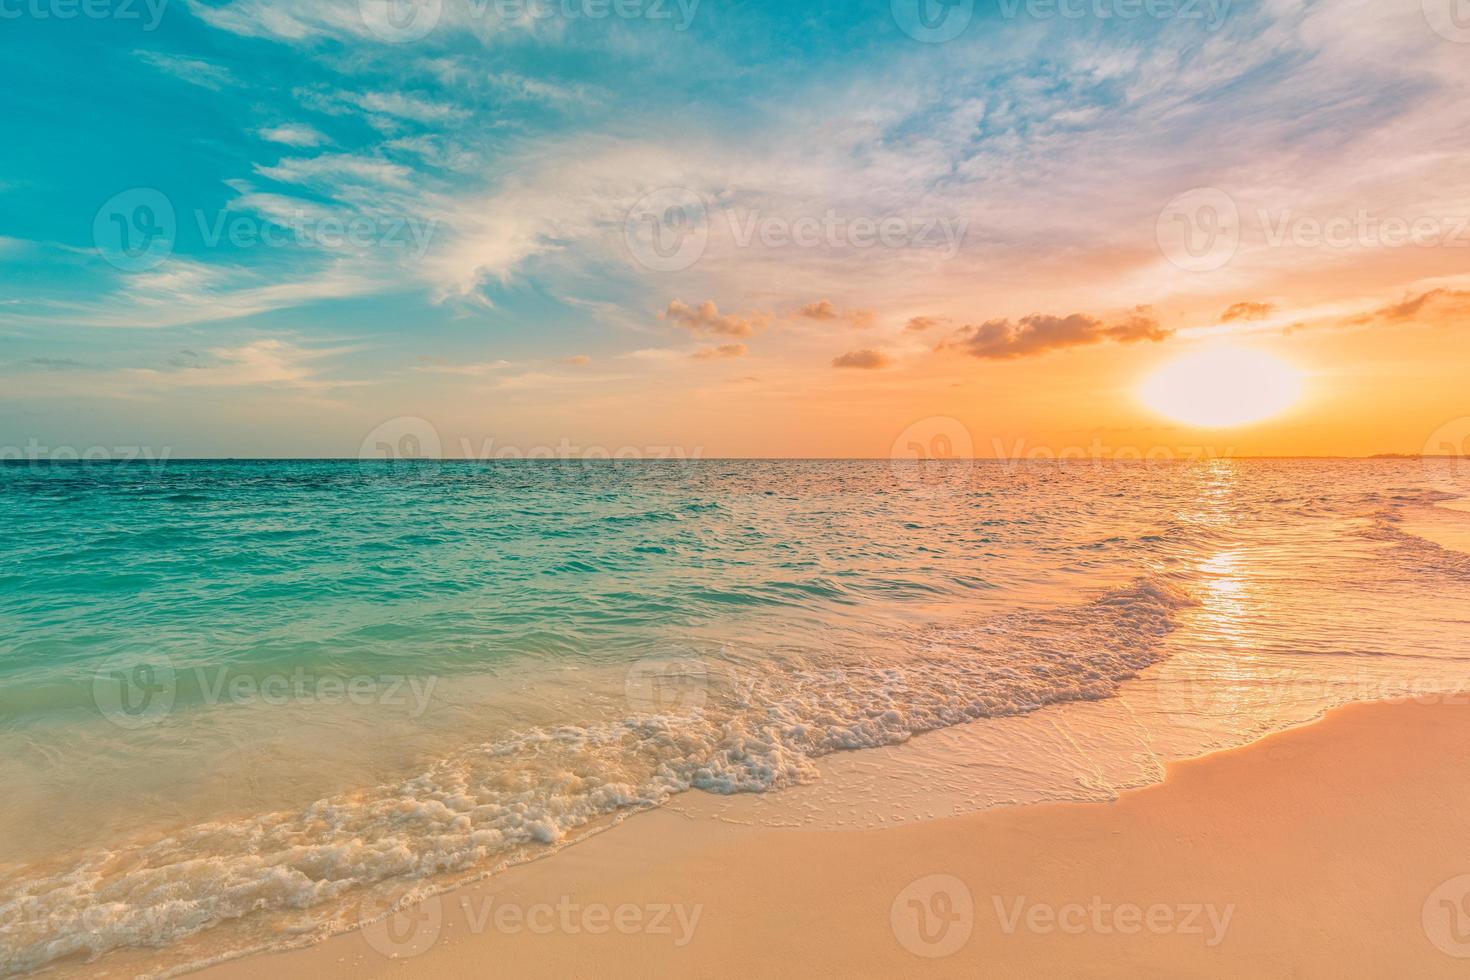 Sea ocean beach sunset sunrise landscape outdoor. Water wave with white foam. Beautiful sunset colorful sky with clouds. Natural island, sun rays seascape, dream nature. Inspirational shore, coast photo